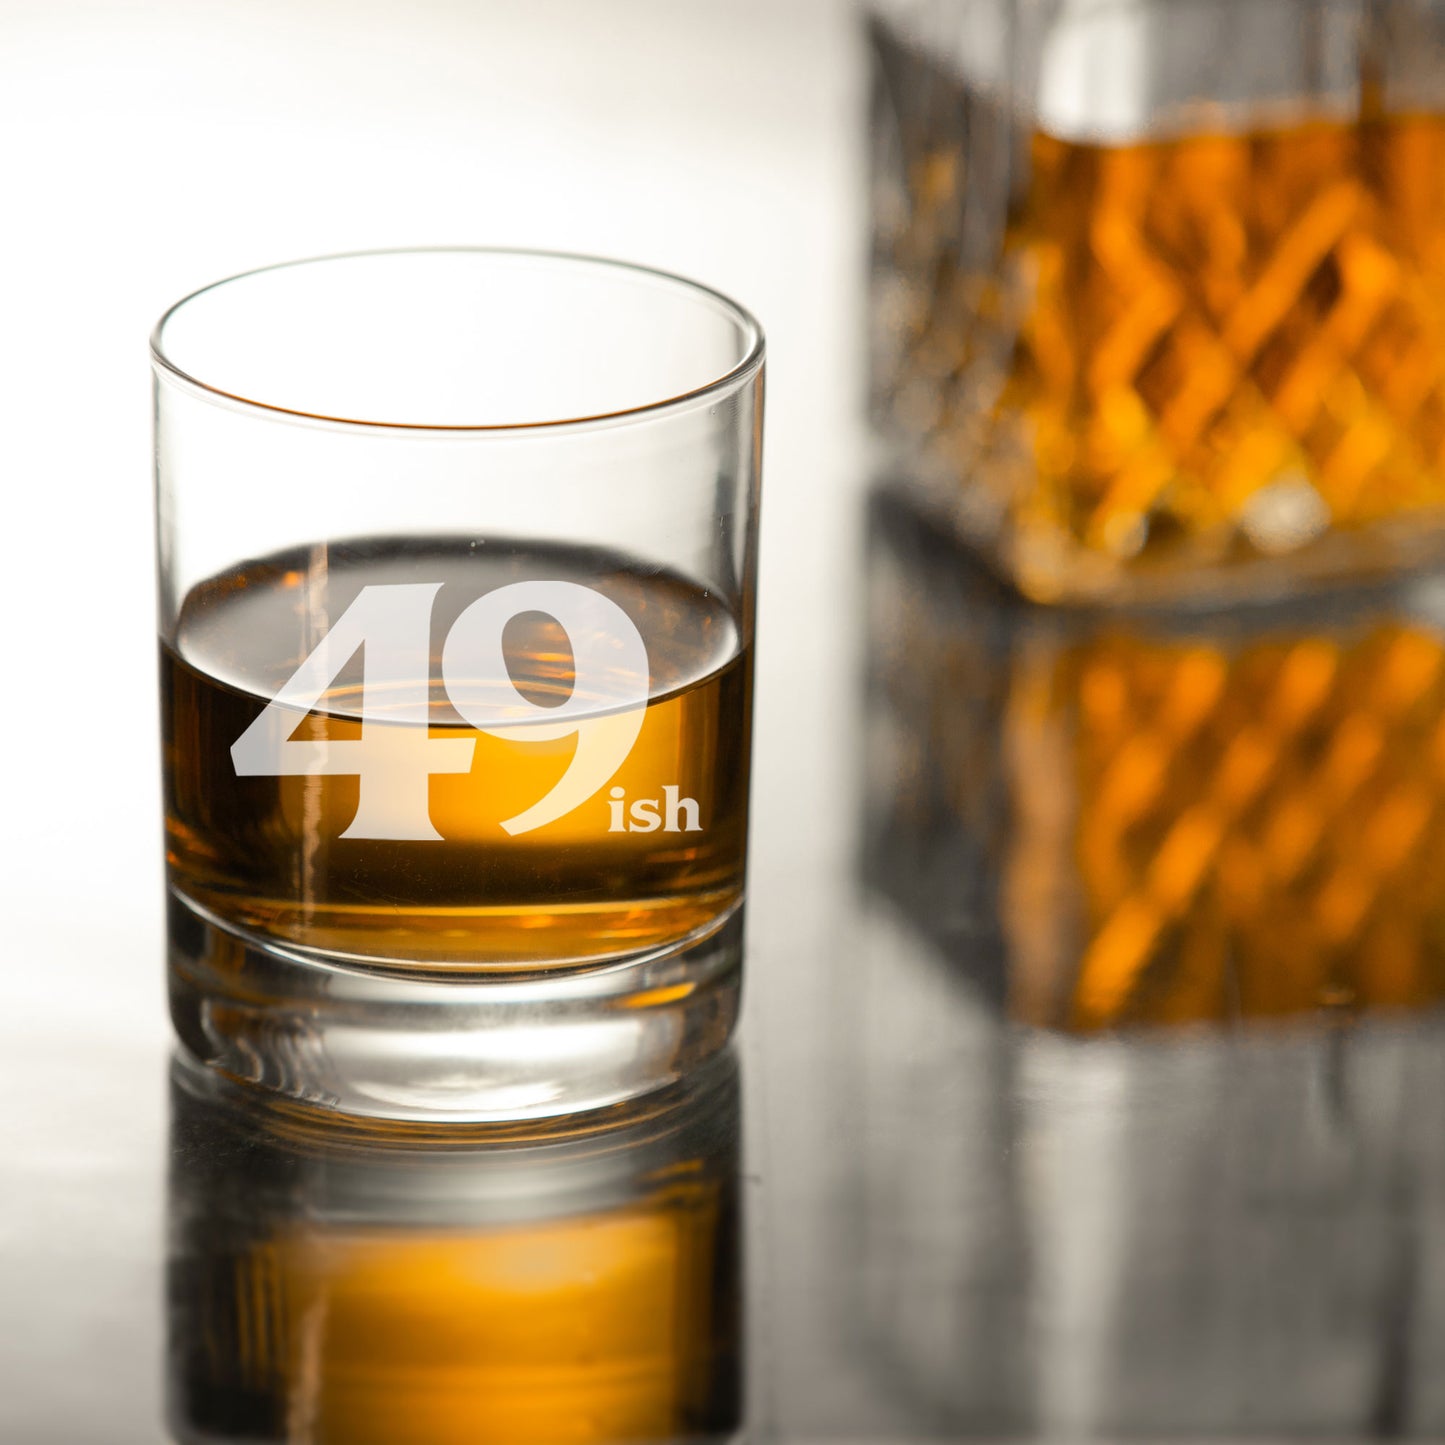 49ish Whisky Glass and/or Coaster Set  - Always Looking Good -   